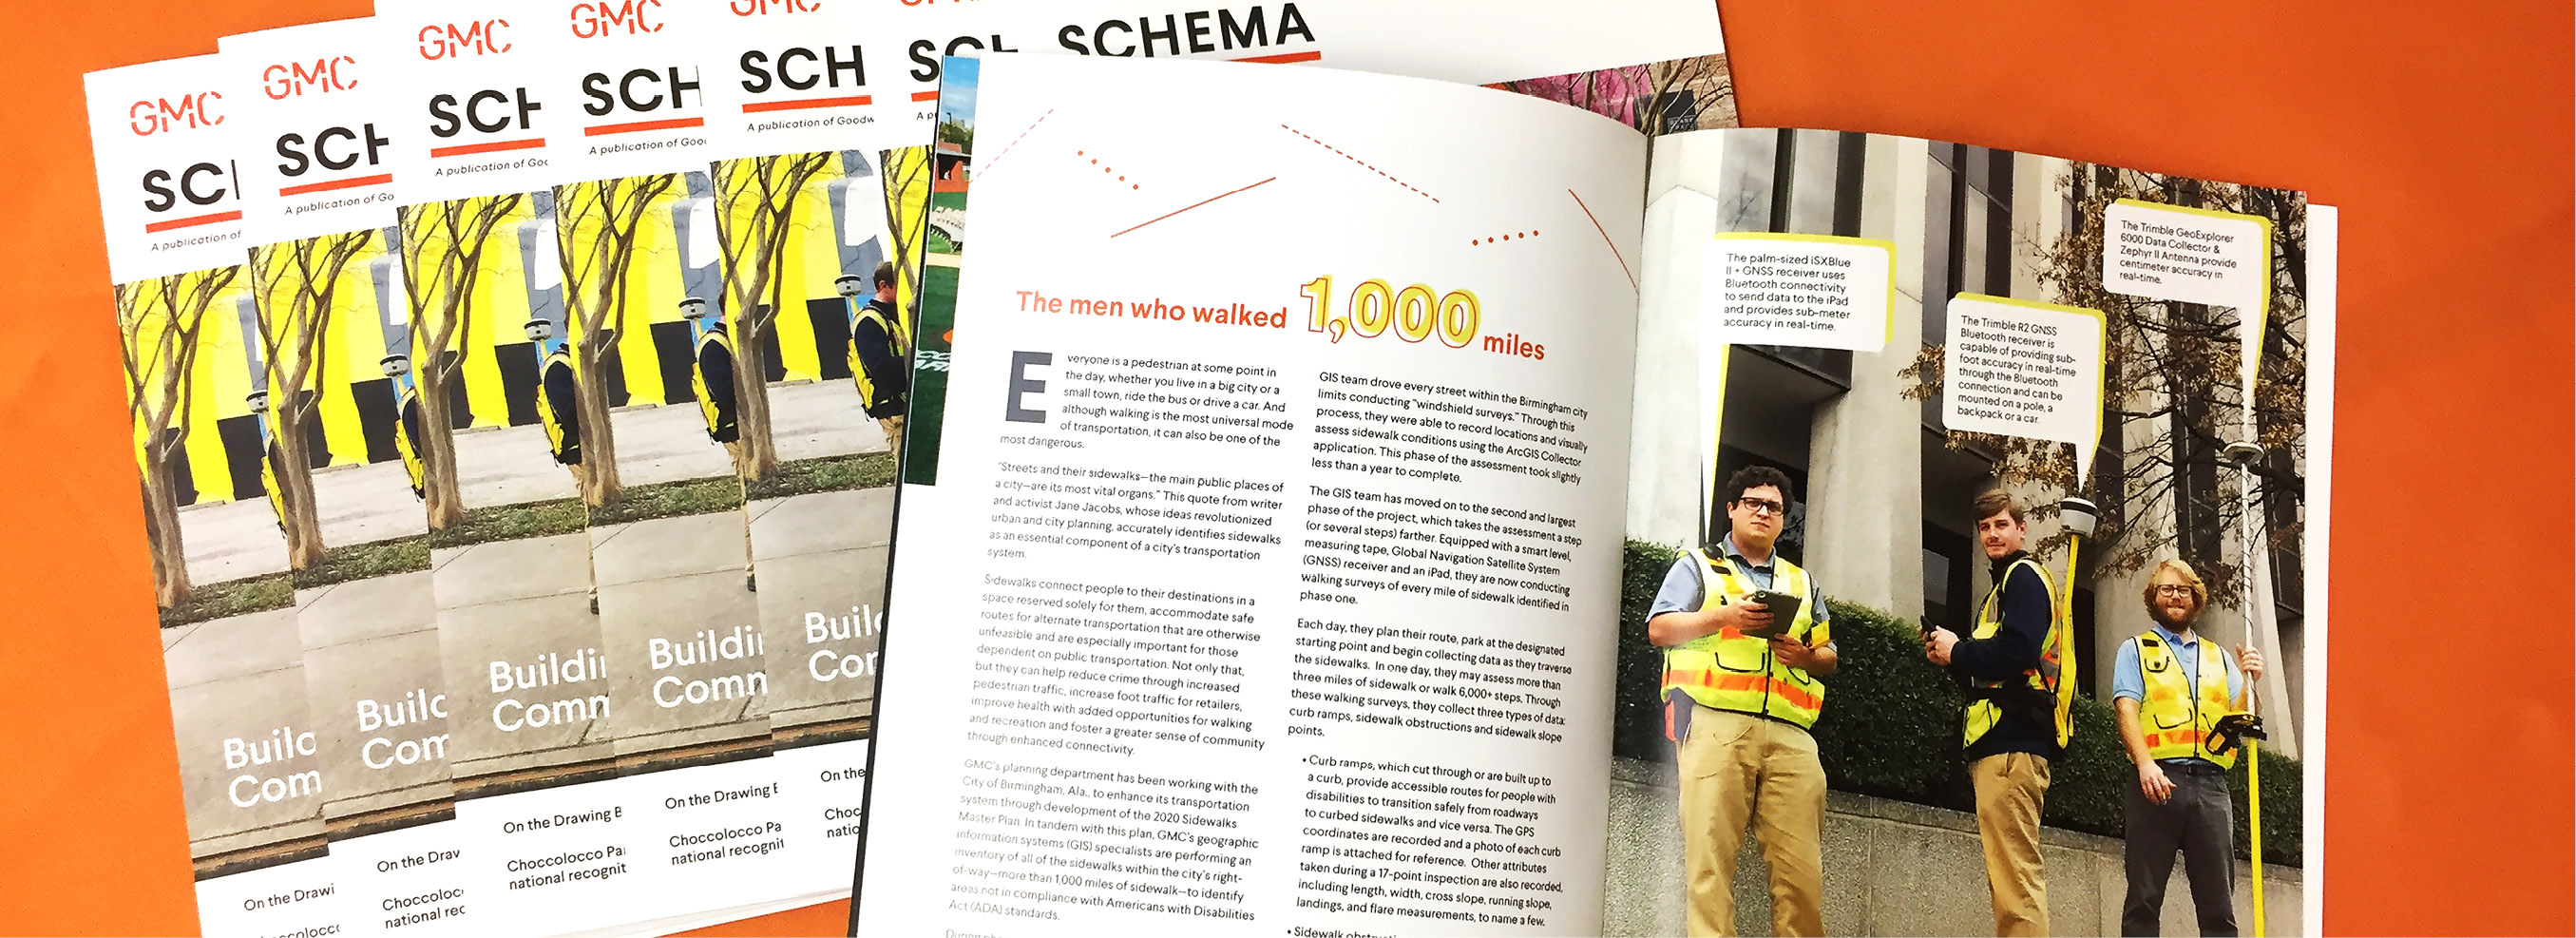 Schema Issue 03 Feature Image v2 2